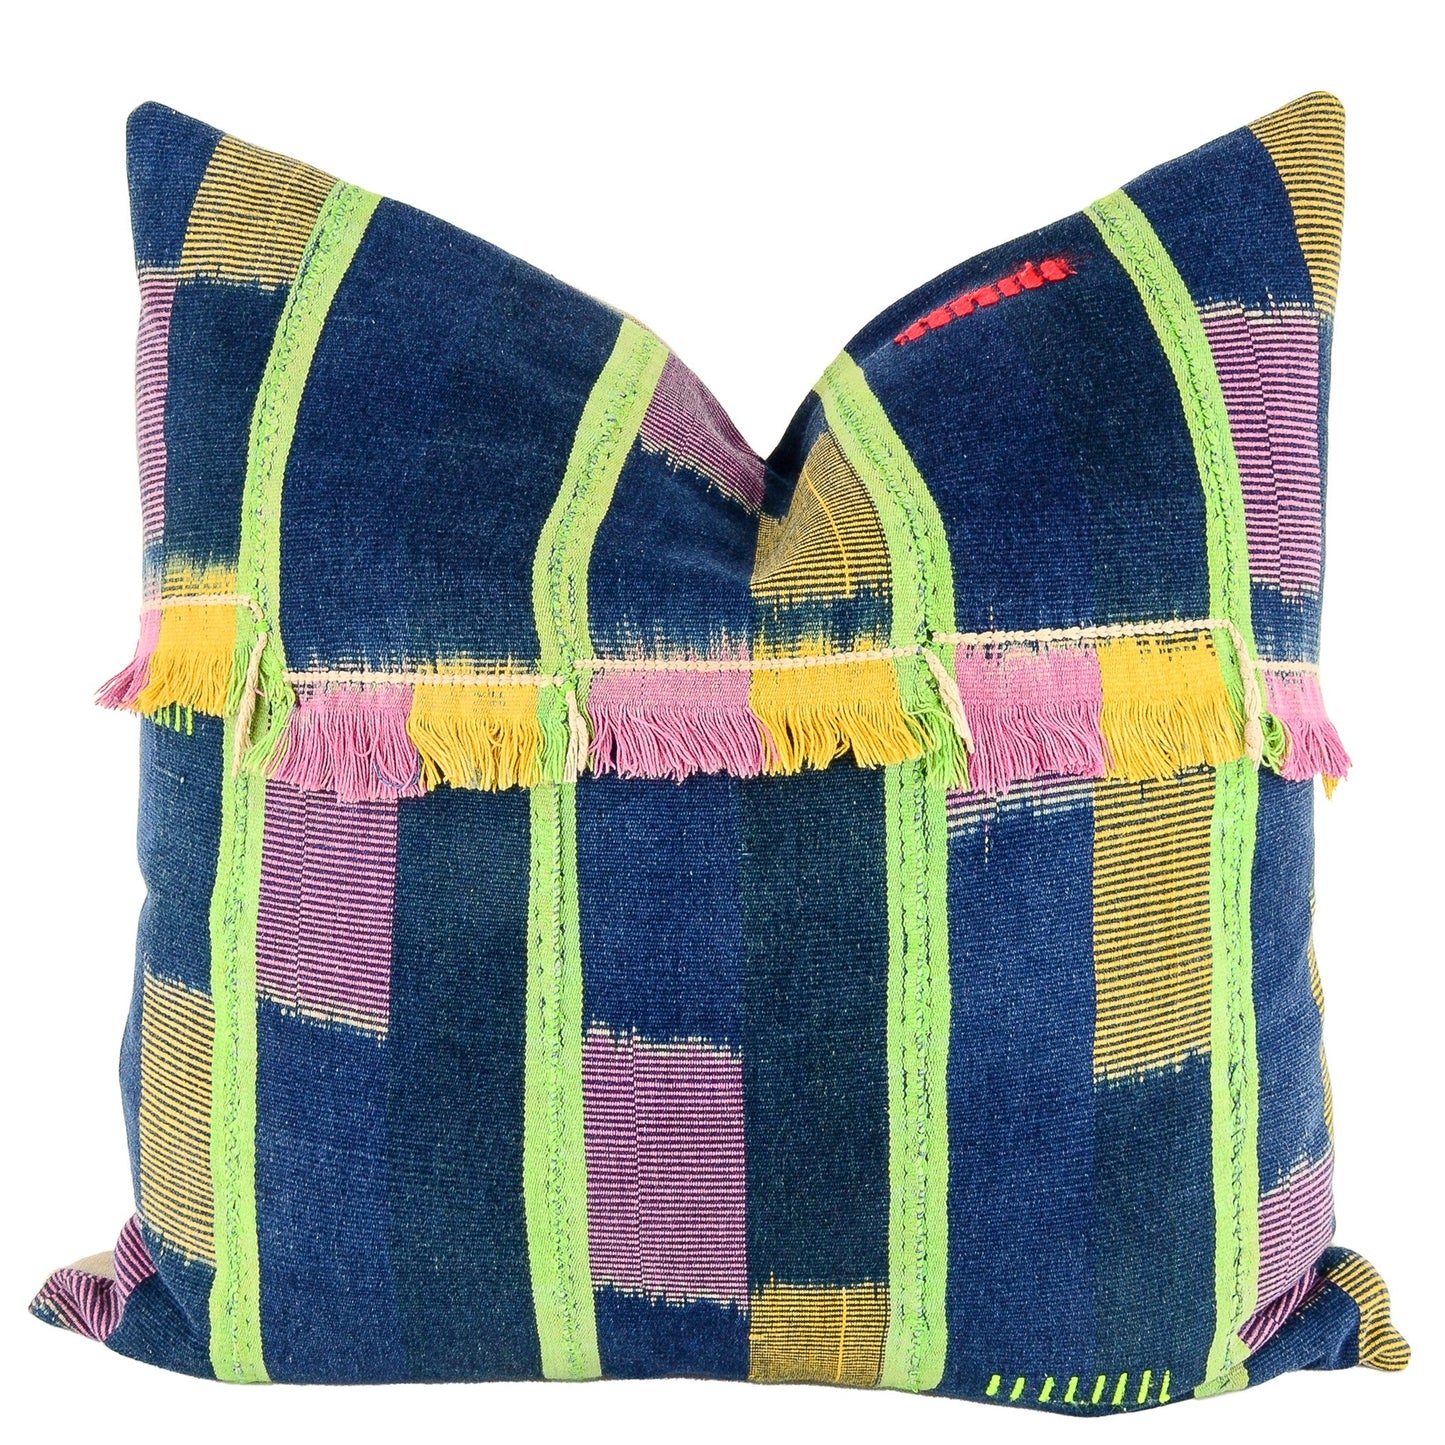 Front of pillow with rich blue, pink and yellow patterns, green stripes, colorful embroidery and pink and yellow fringe made from vintage handwoven Baoulé/Baule cotton cloth from Africa's Ivory Coast, reflecting the traditions, symbols, and tribal lives of the Baoulé/Baule people